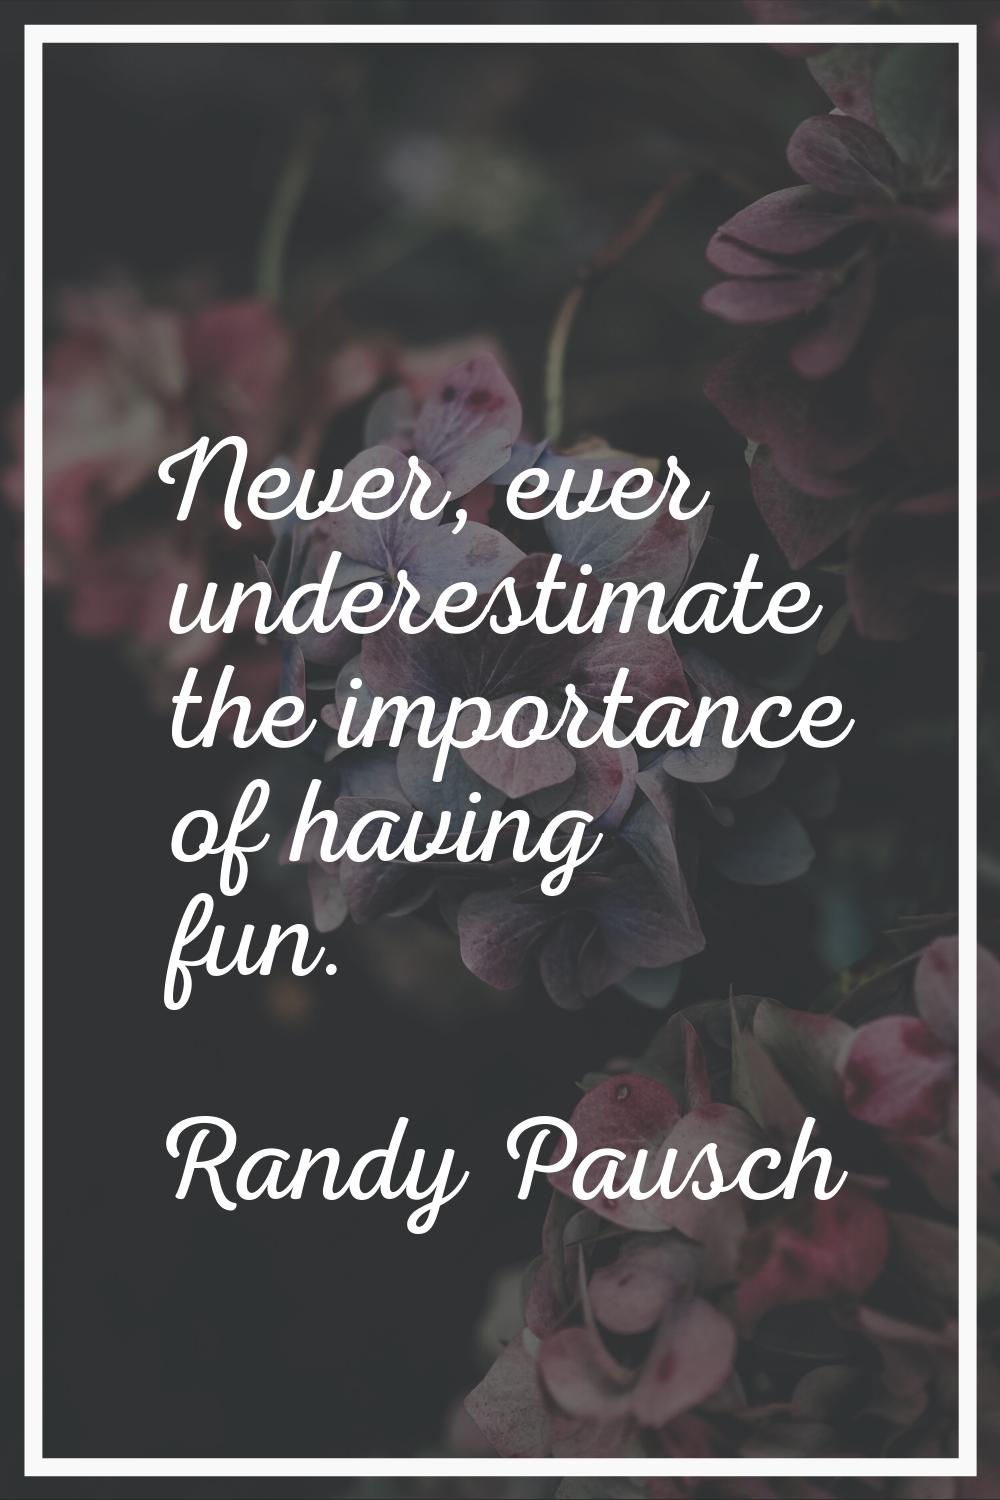 Never, ever underestimate the importance of having fun.